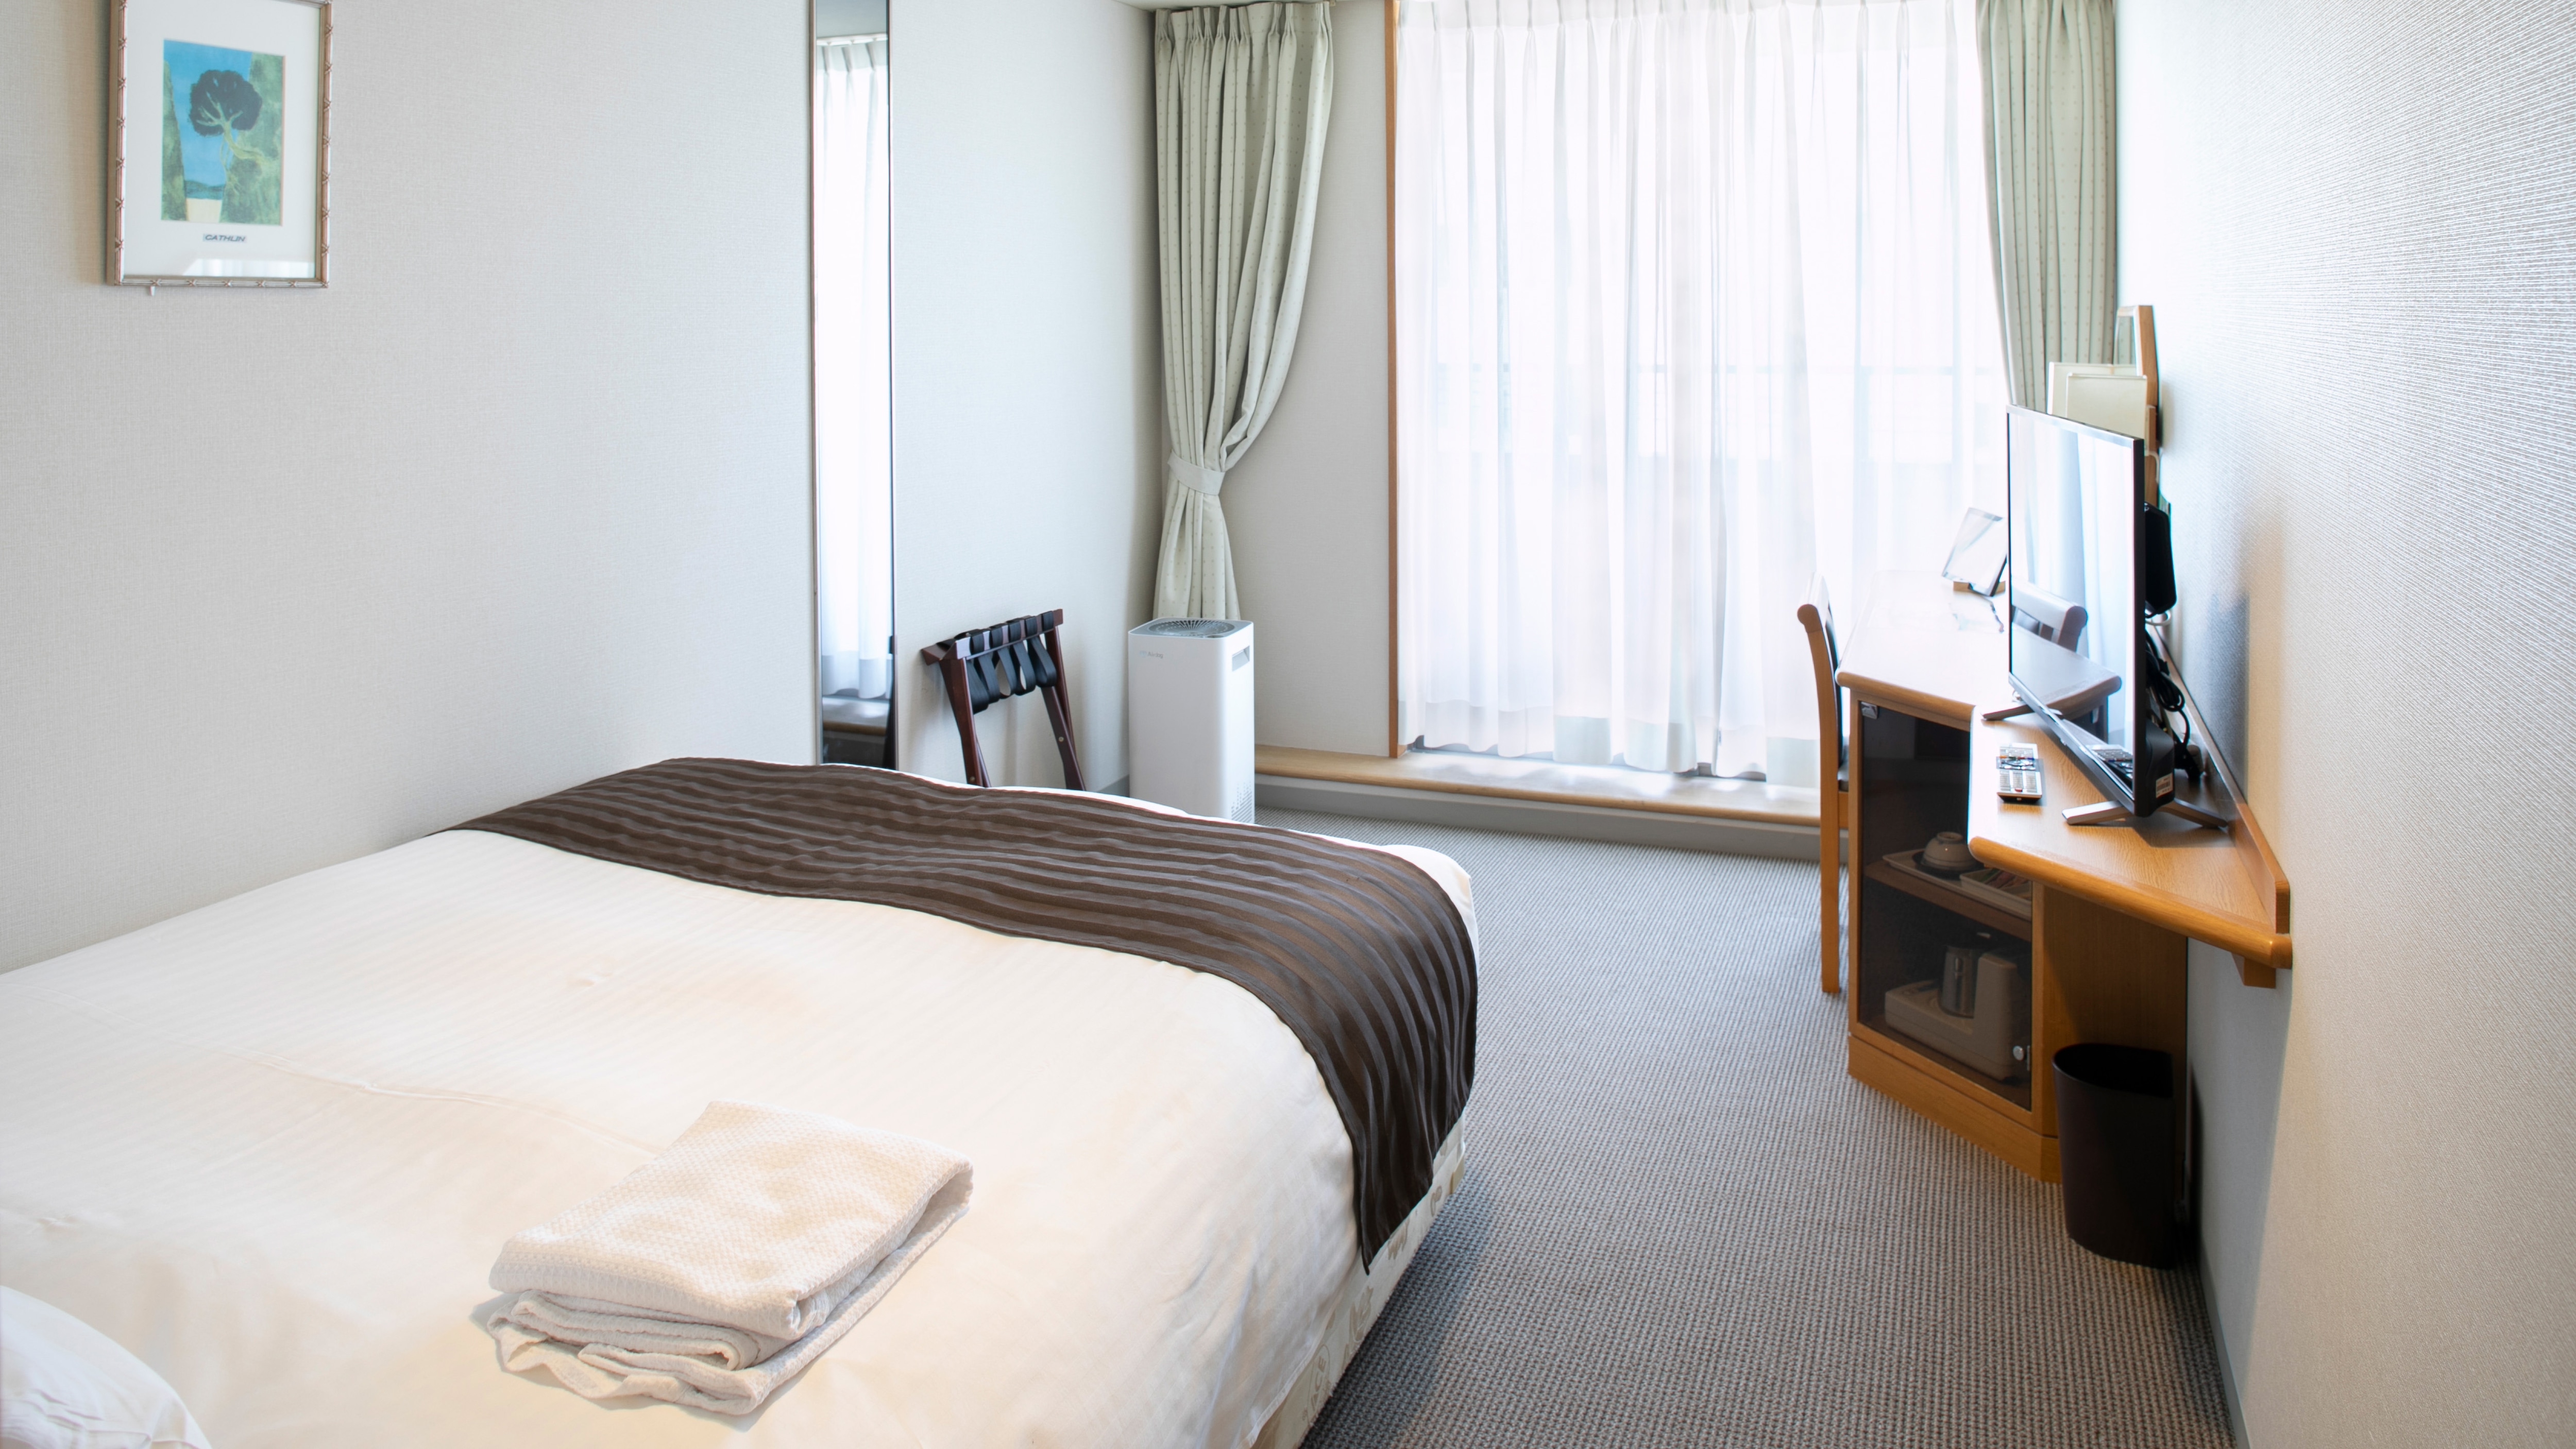 [Single Terrace Room] This room can accommodate up to 2 people as a double occupancy.